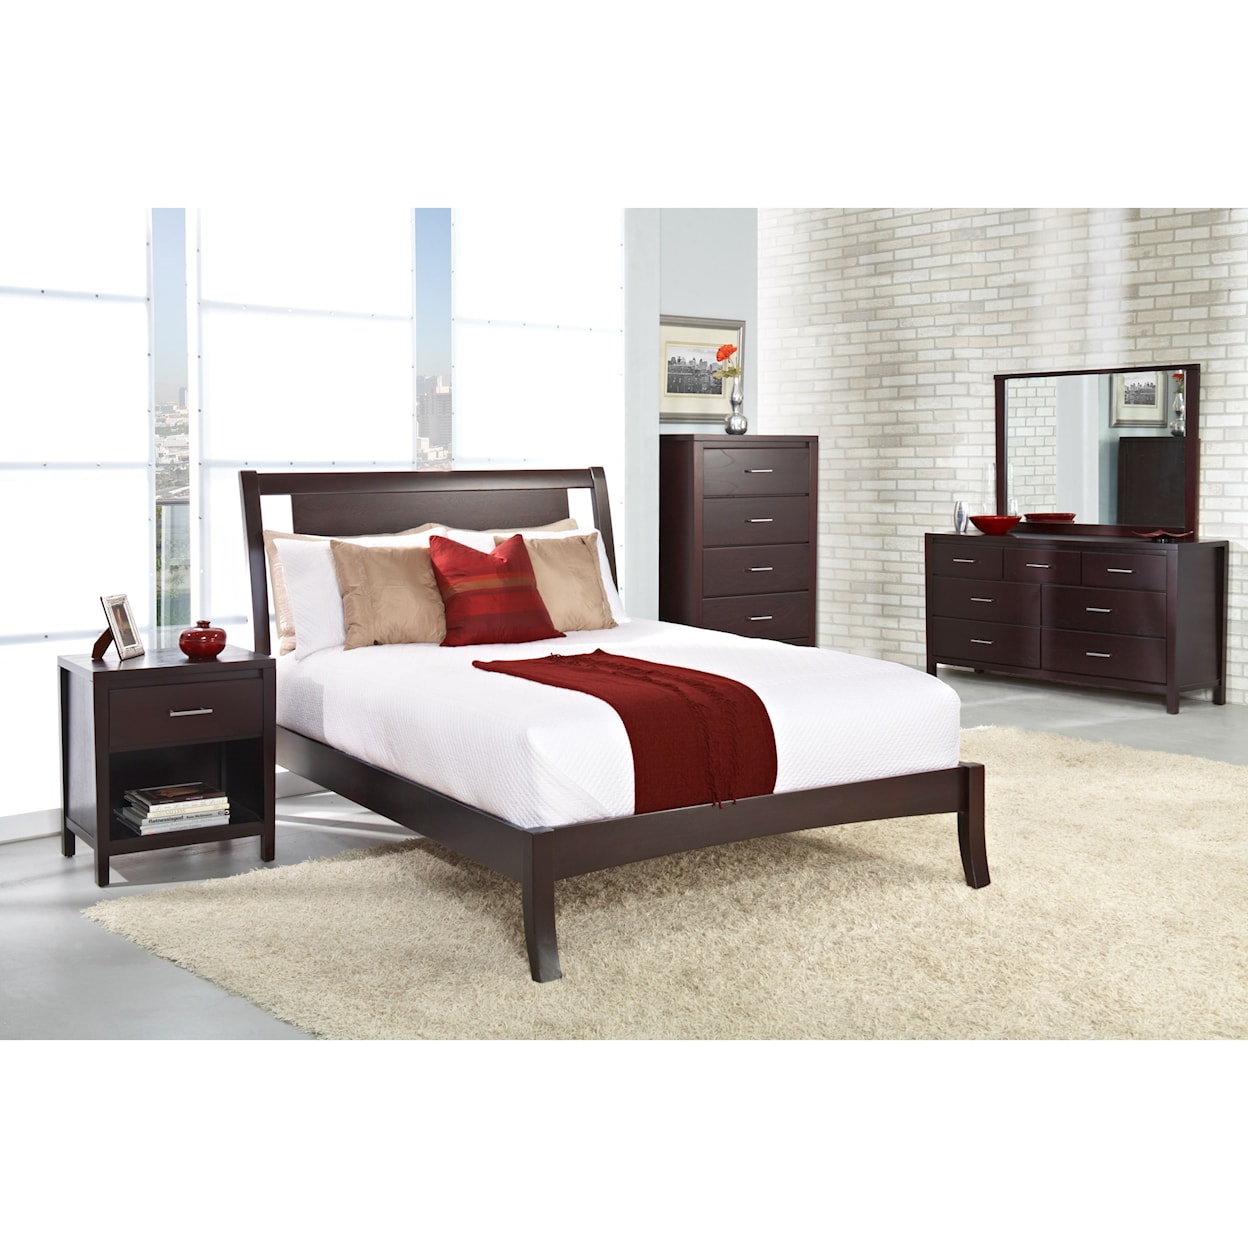 Modus International Nevis Cal King Low-Profile Bed